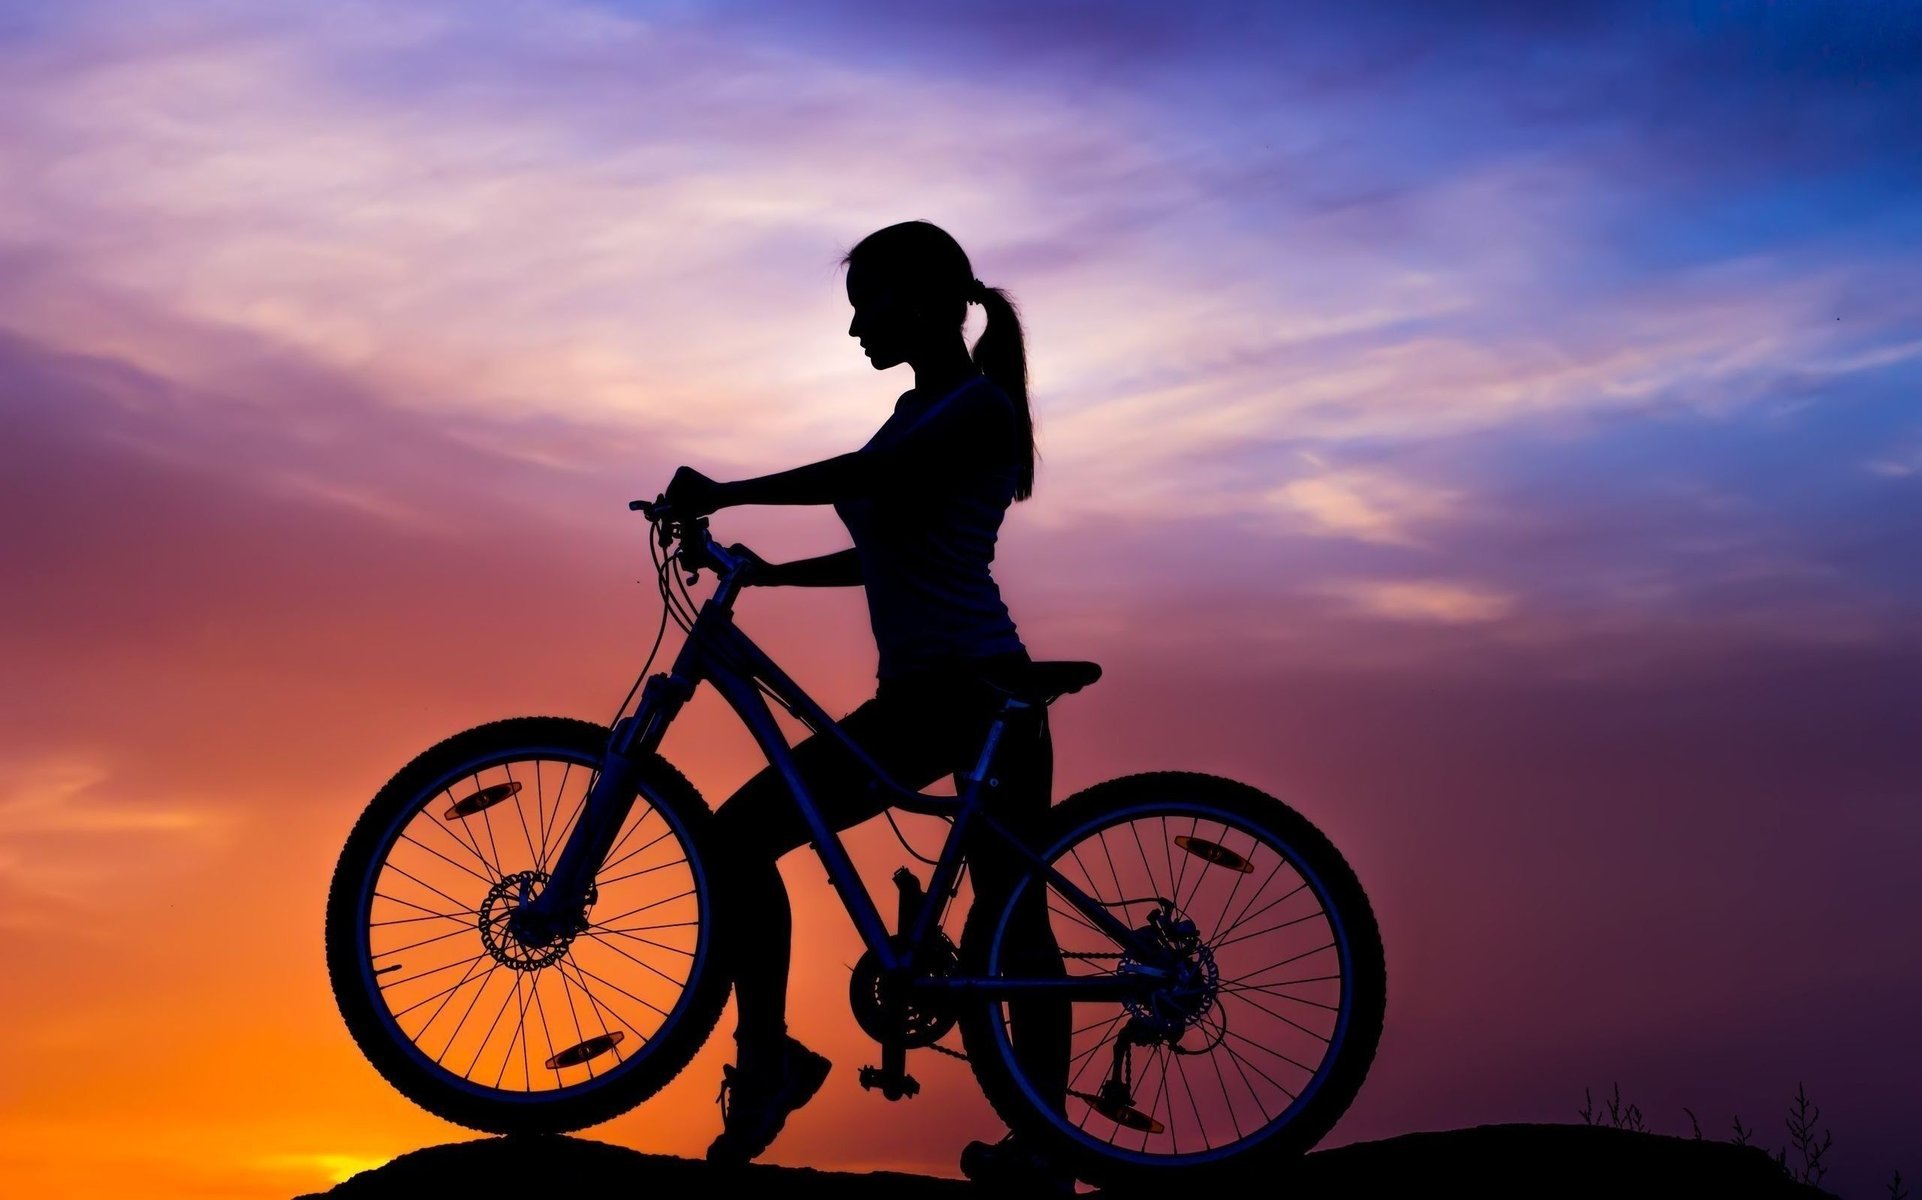 A girl at sunset. Cycling